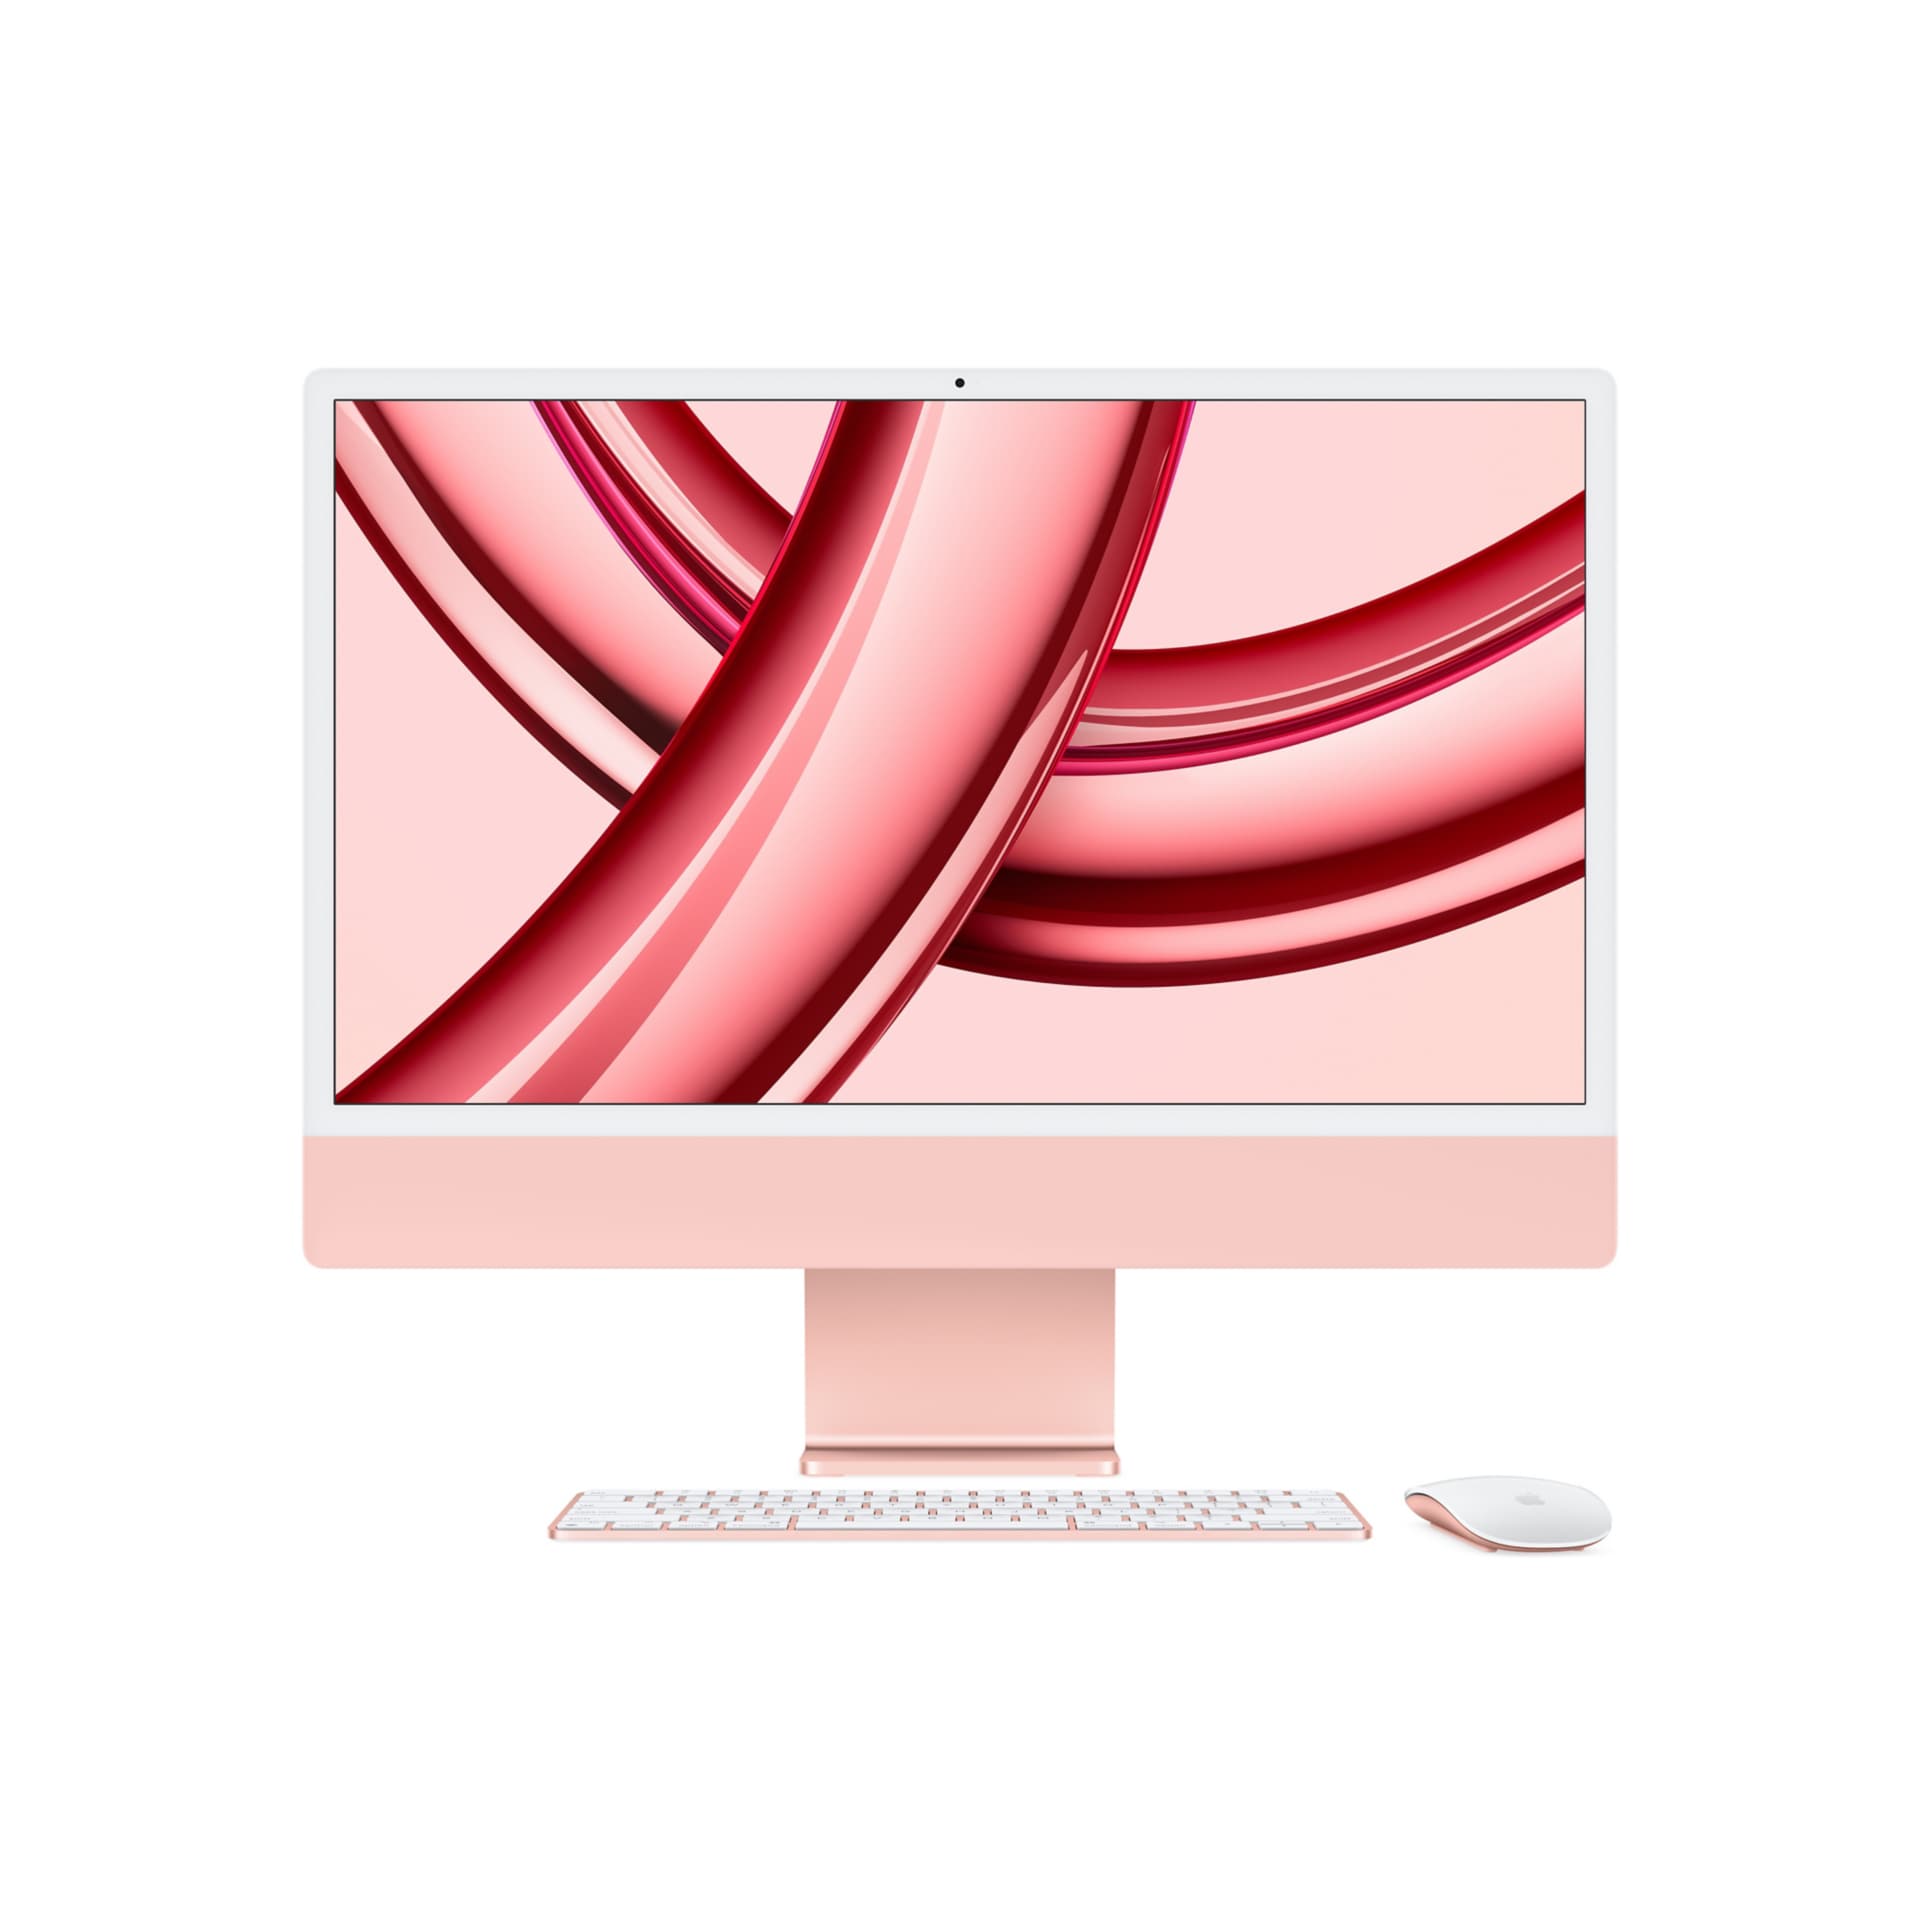 - SSD Apple Computers M1 - iMac 8C8C 256GB - RAM All-in-One 24\